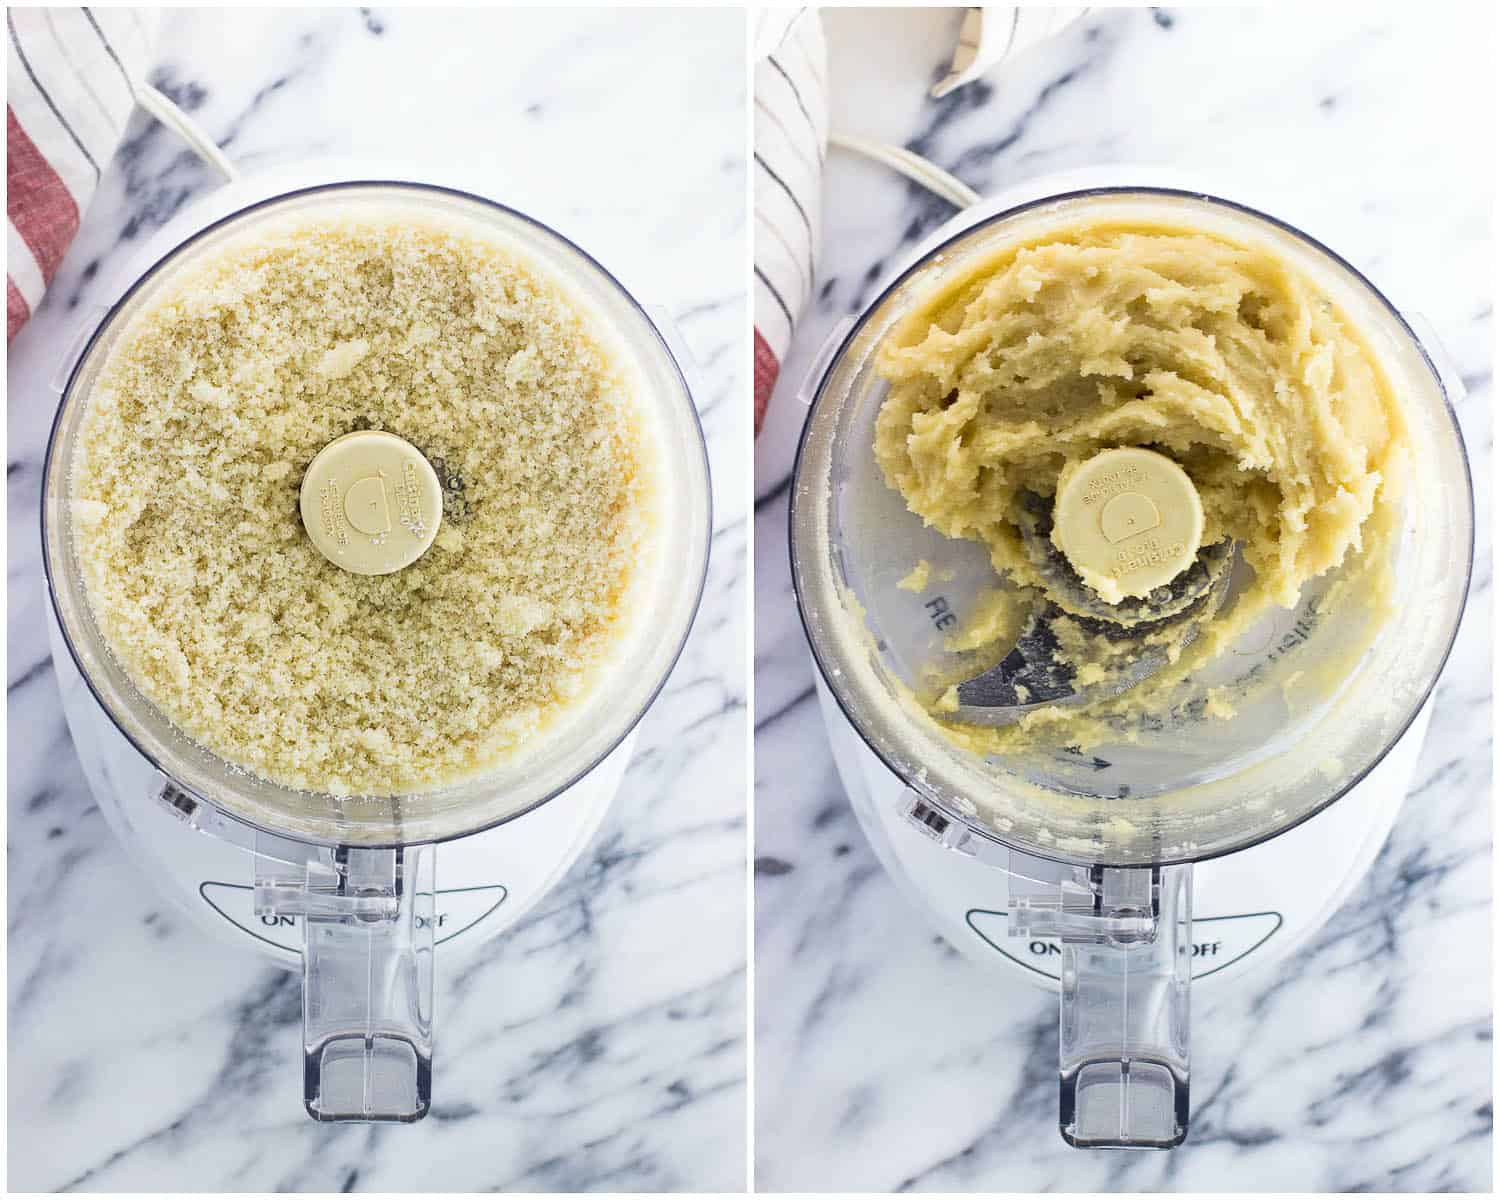 A side-by-side photo of the dry ingredients combined in the food processor, and a picture of all of the dough ingredients formed into a ball